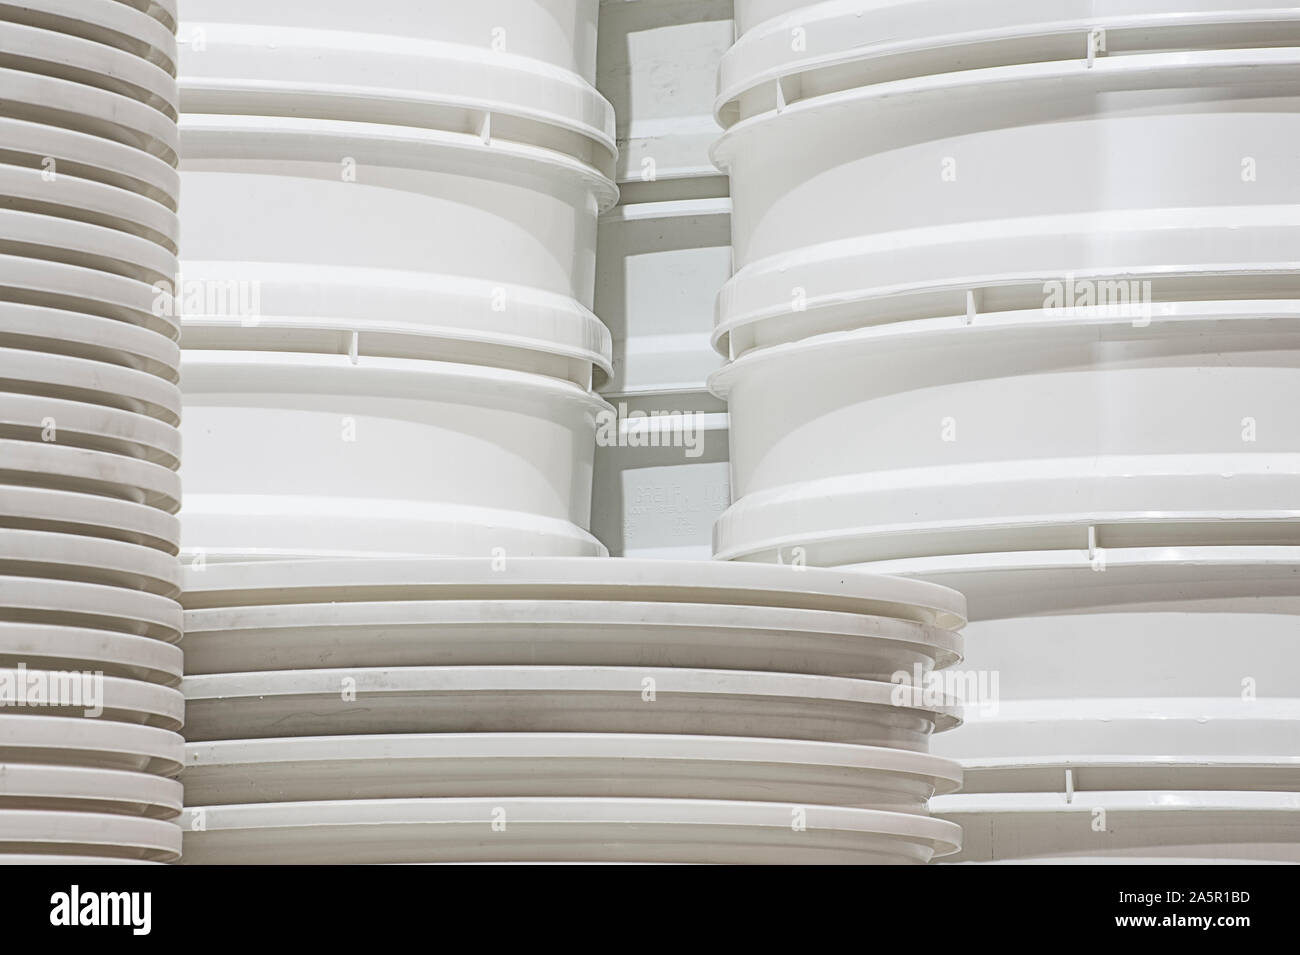 Stack of white buckets Stock Photo